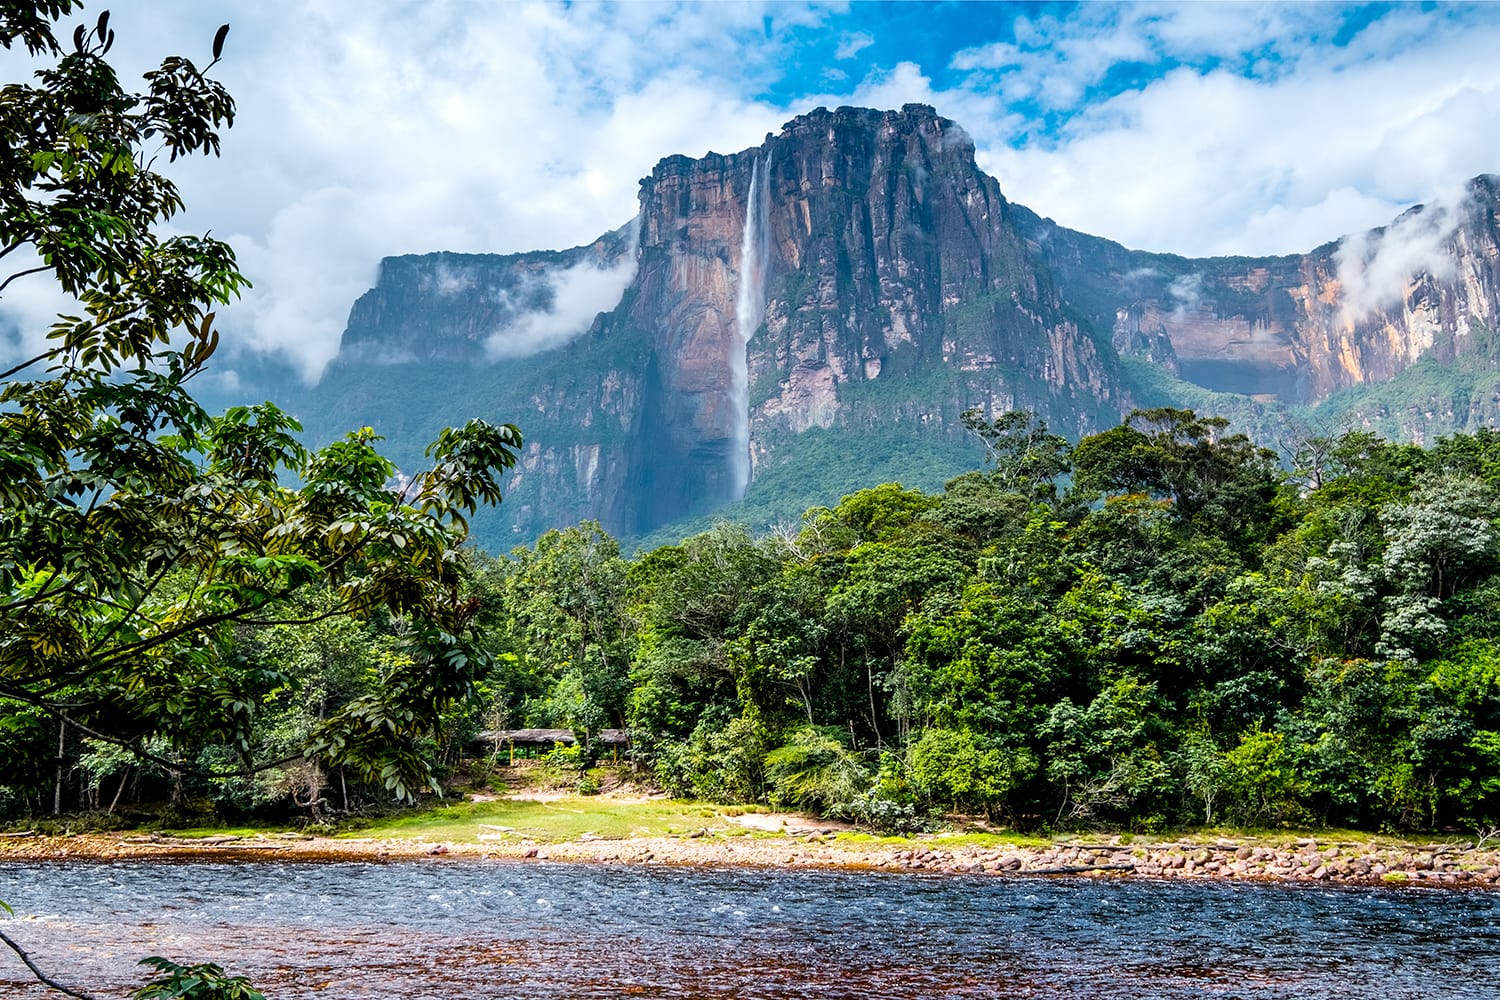 Angel Falls from afar, Colors of Canaima National Park, Venezuela